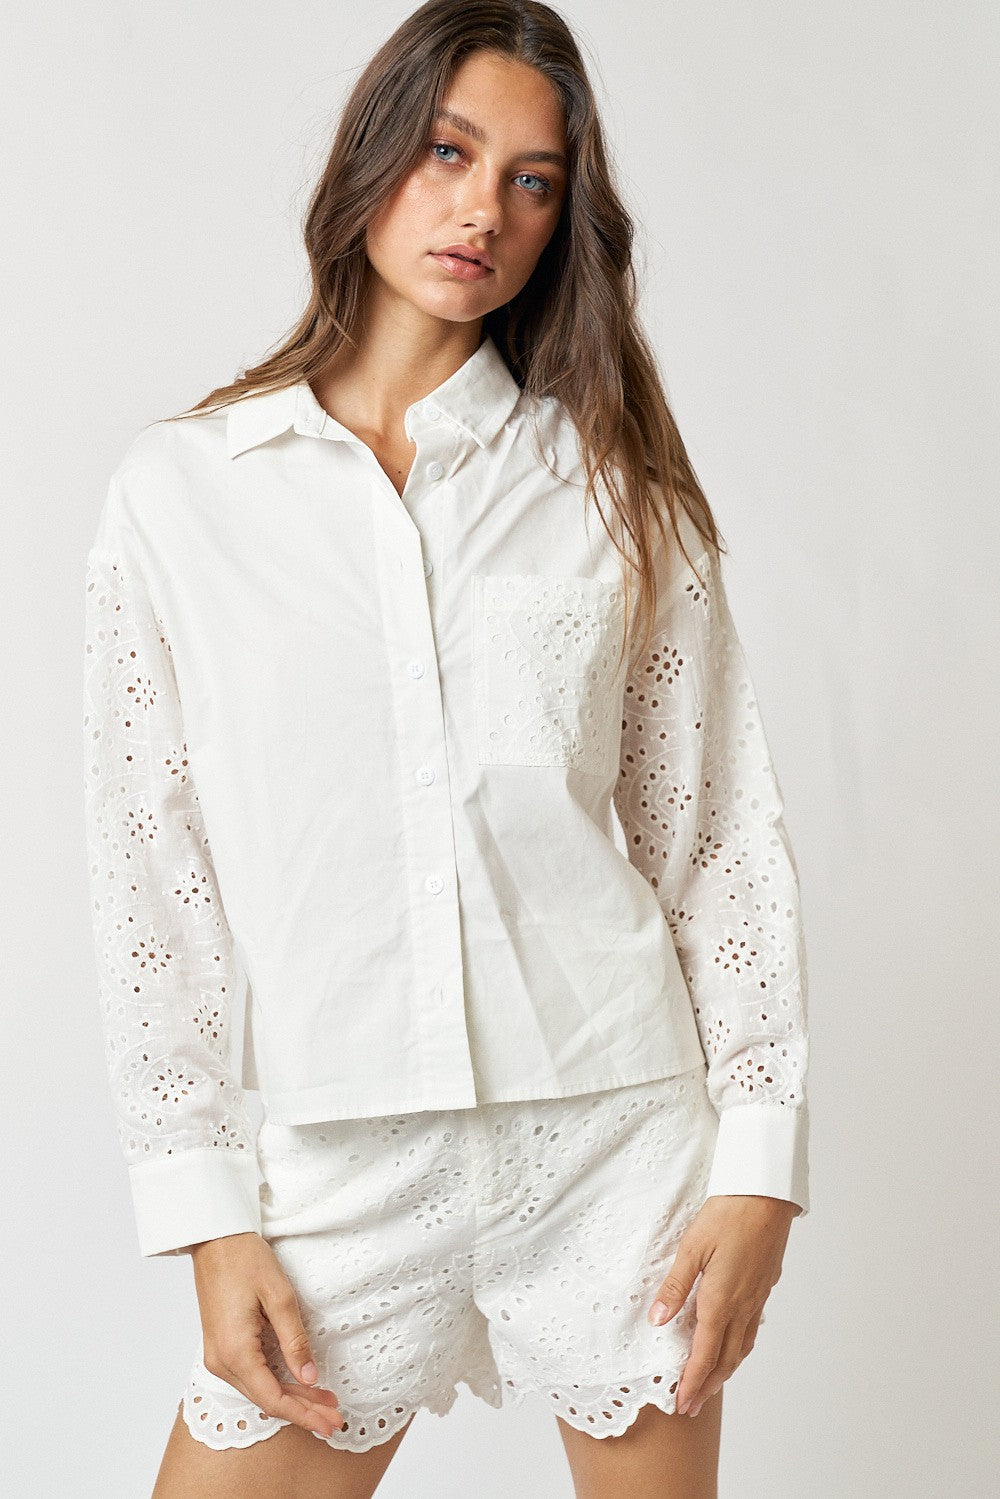 eyelet contrast button down shirt